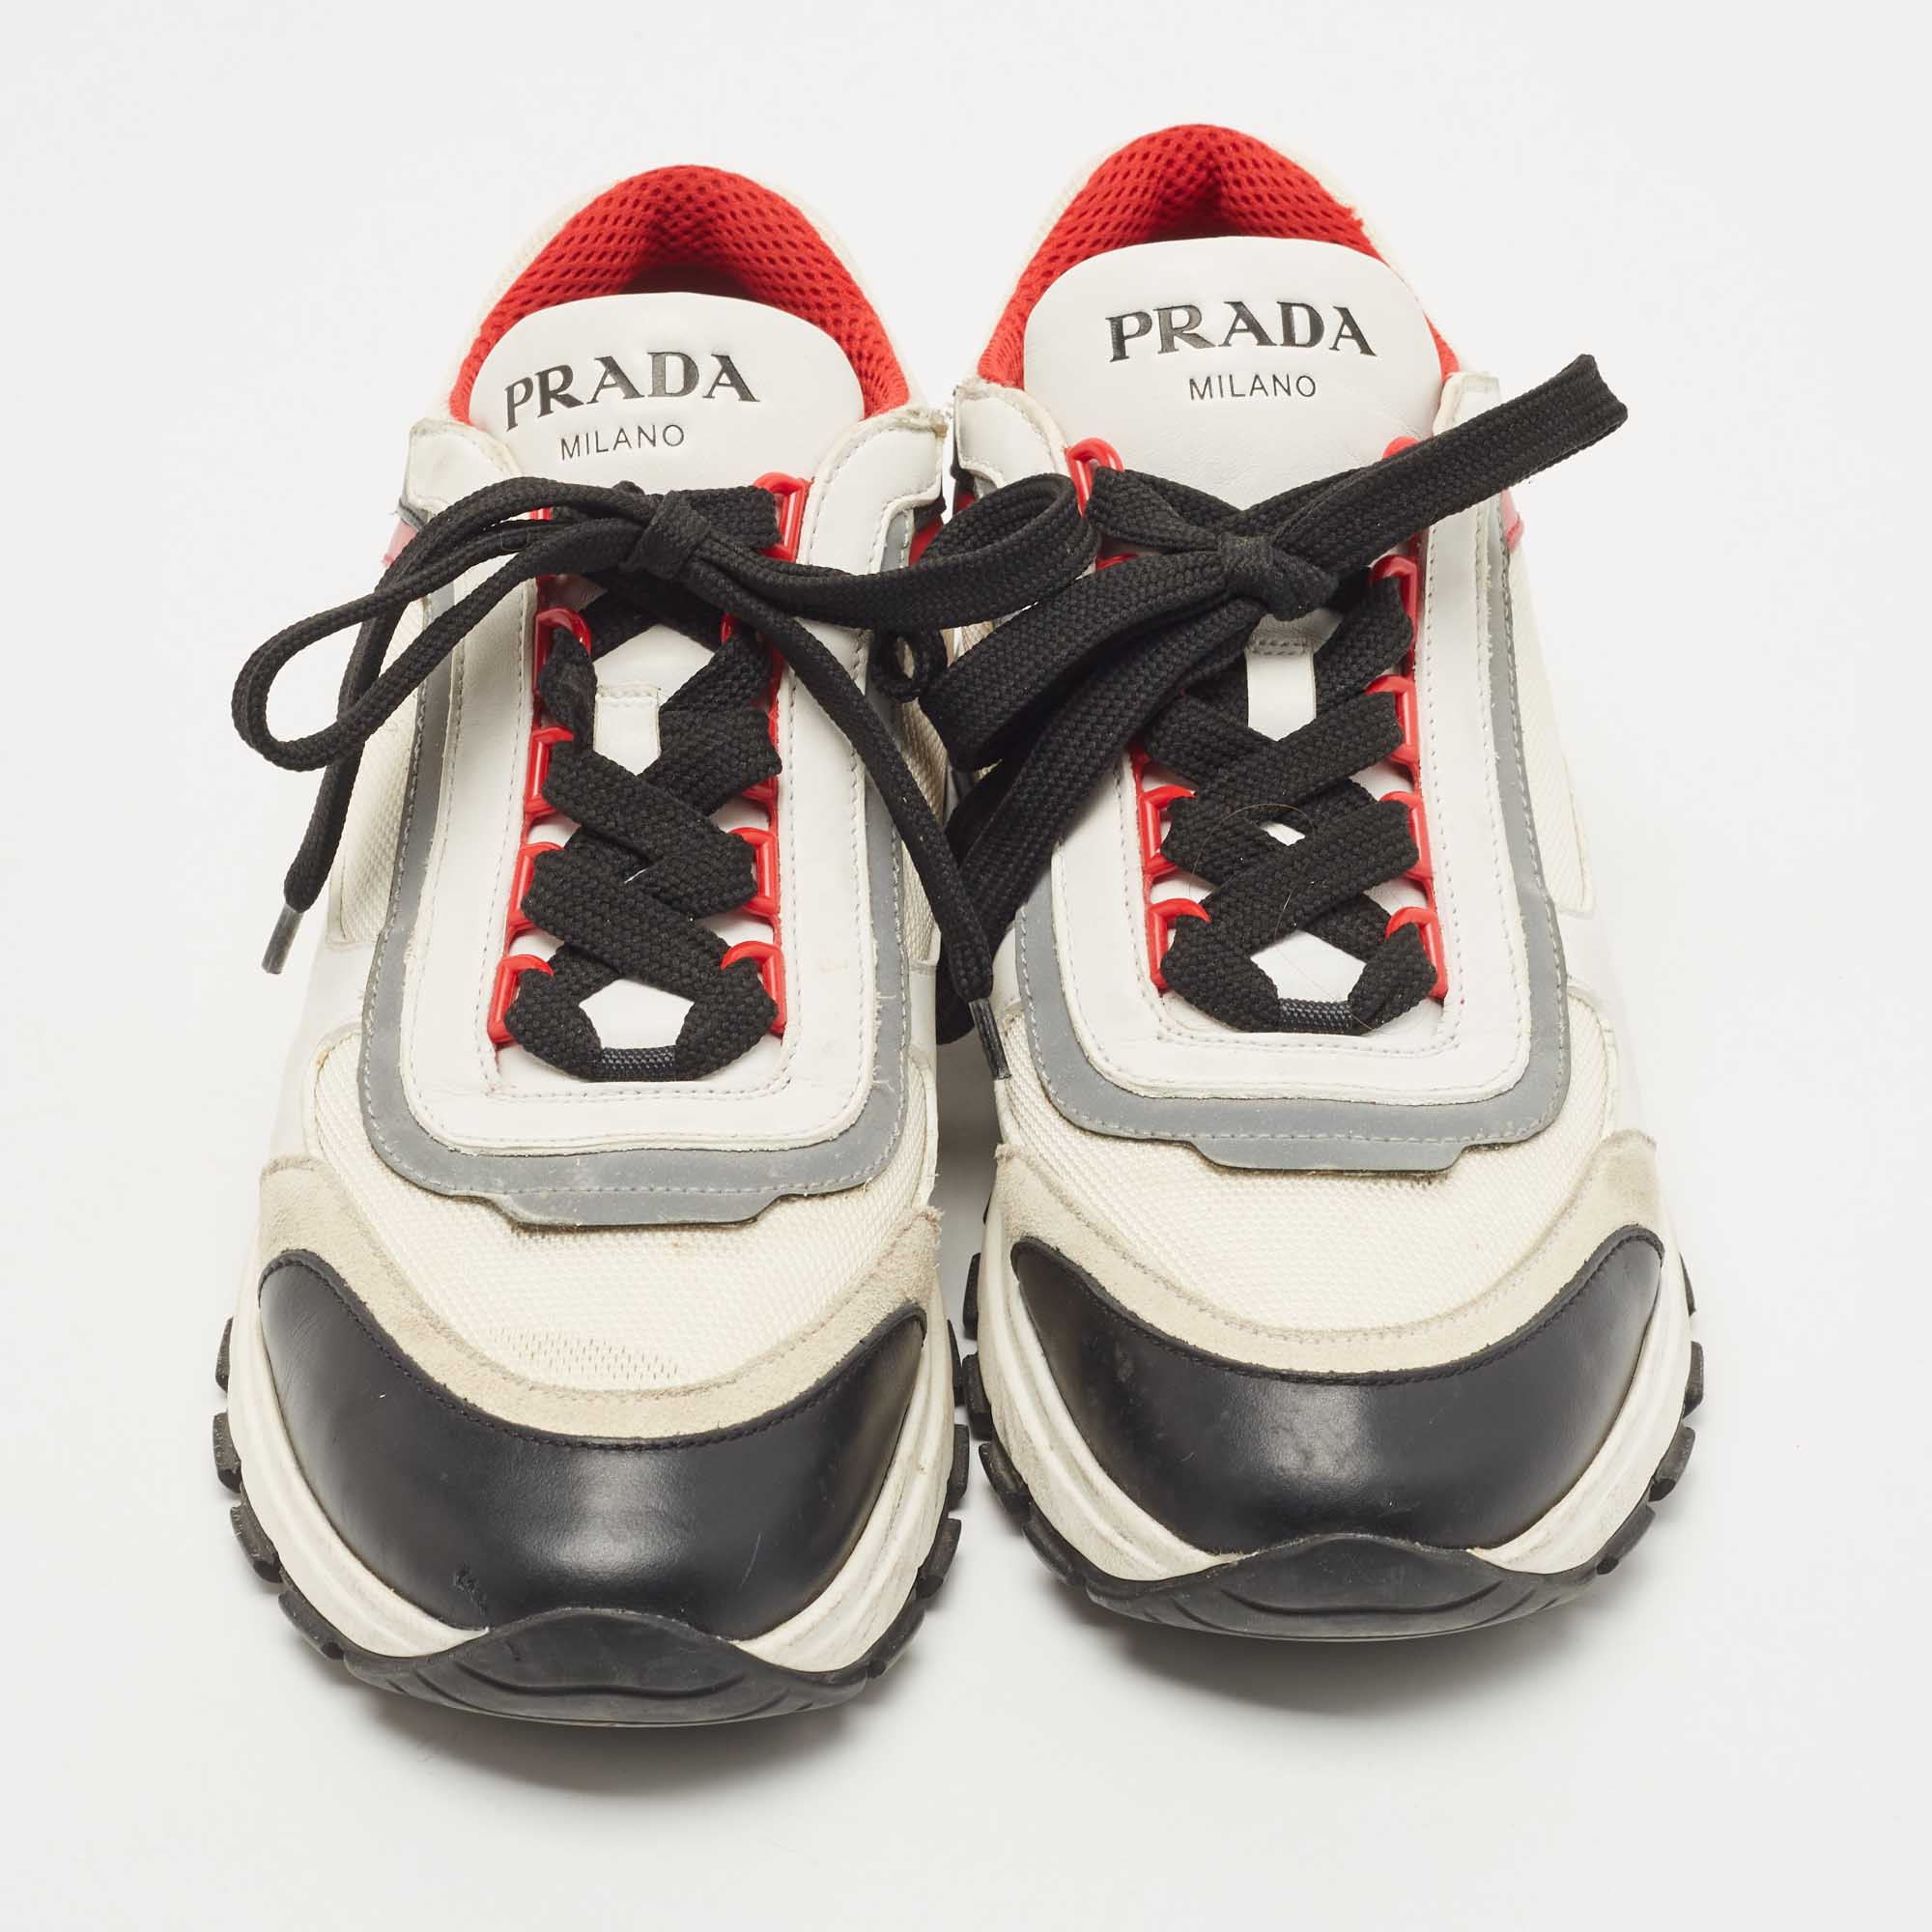 Prada Tricolor Mesh And Leather Low Top Sneakers Size 38